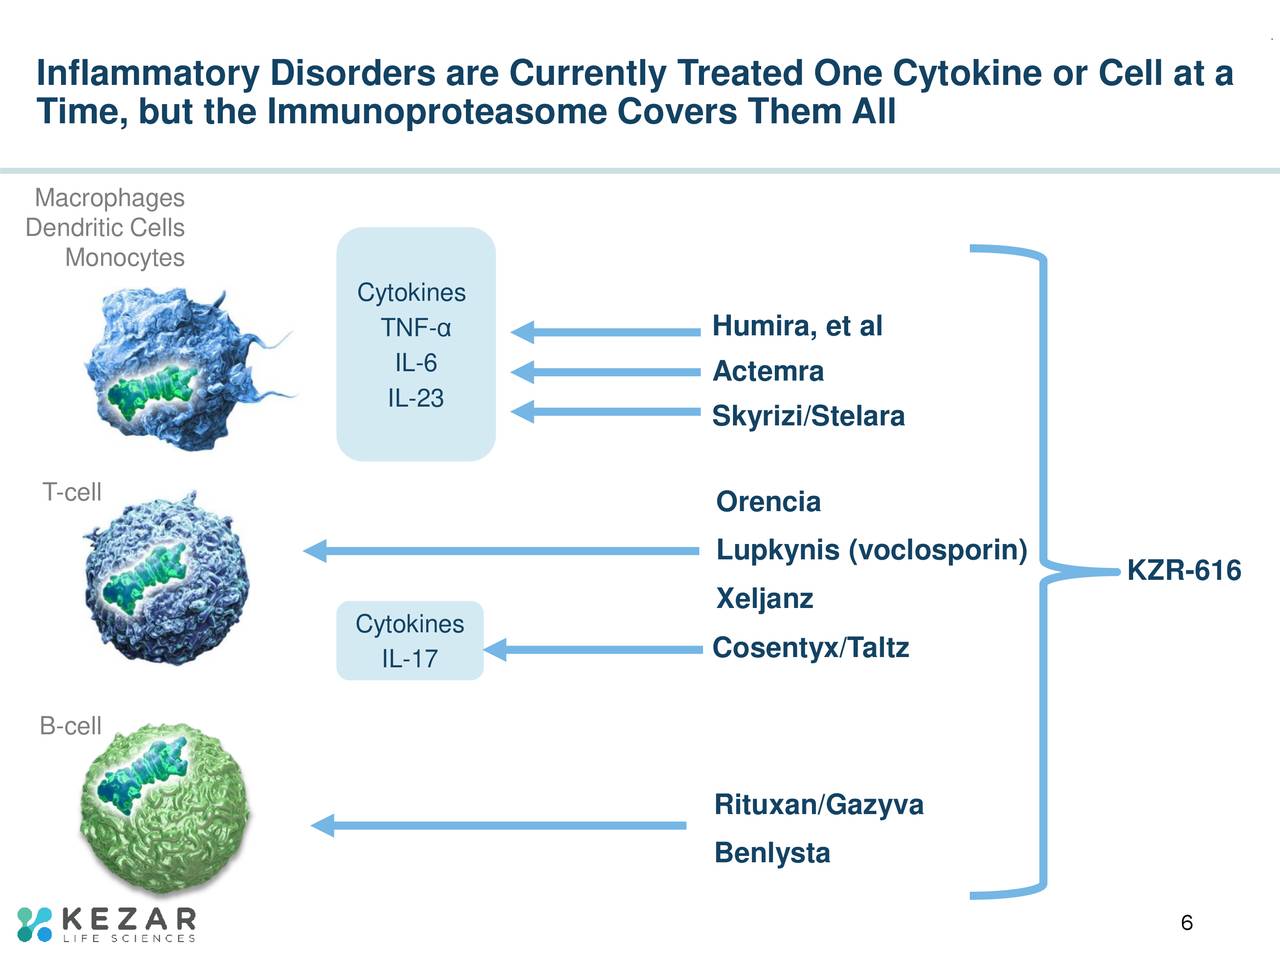 Inflammatory Disorders are Currently Treated One Cytokine or Cell at a